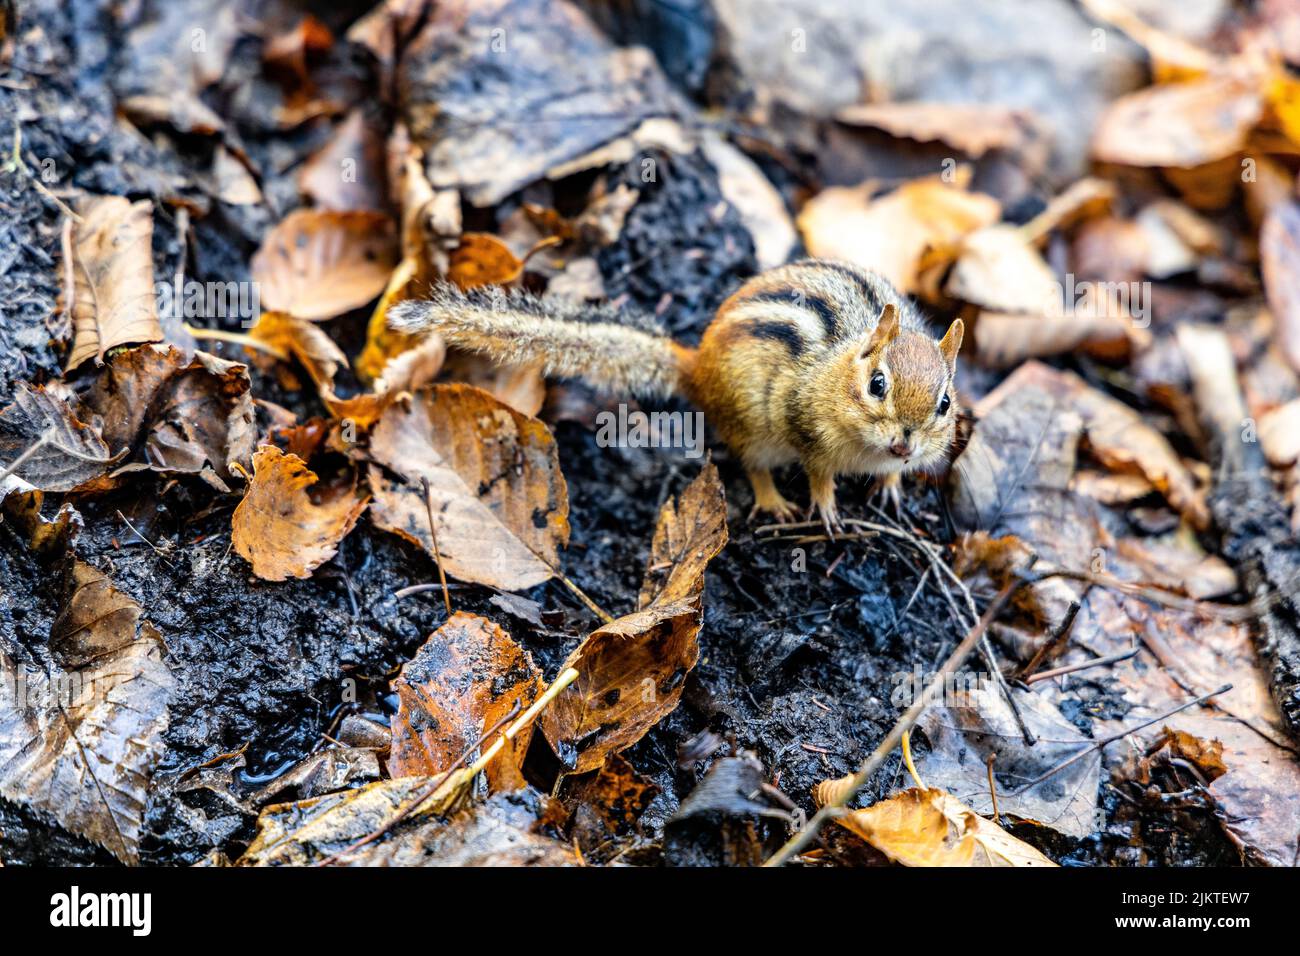 A closeup shot of a squirrel on ground with fallen leaves and ashes Stock Photo